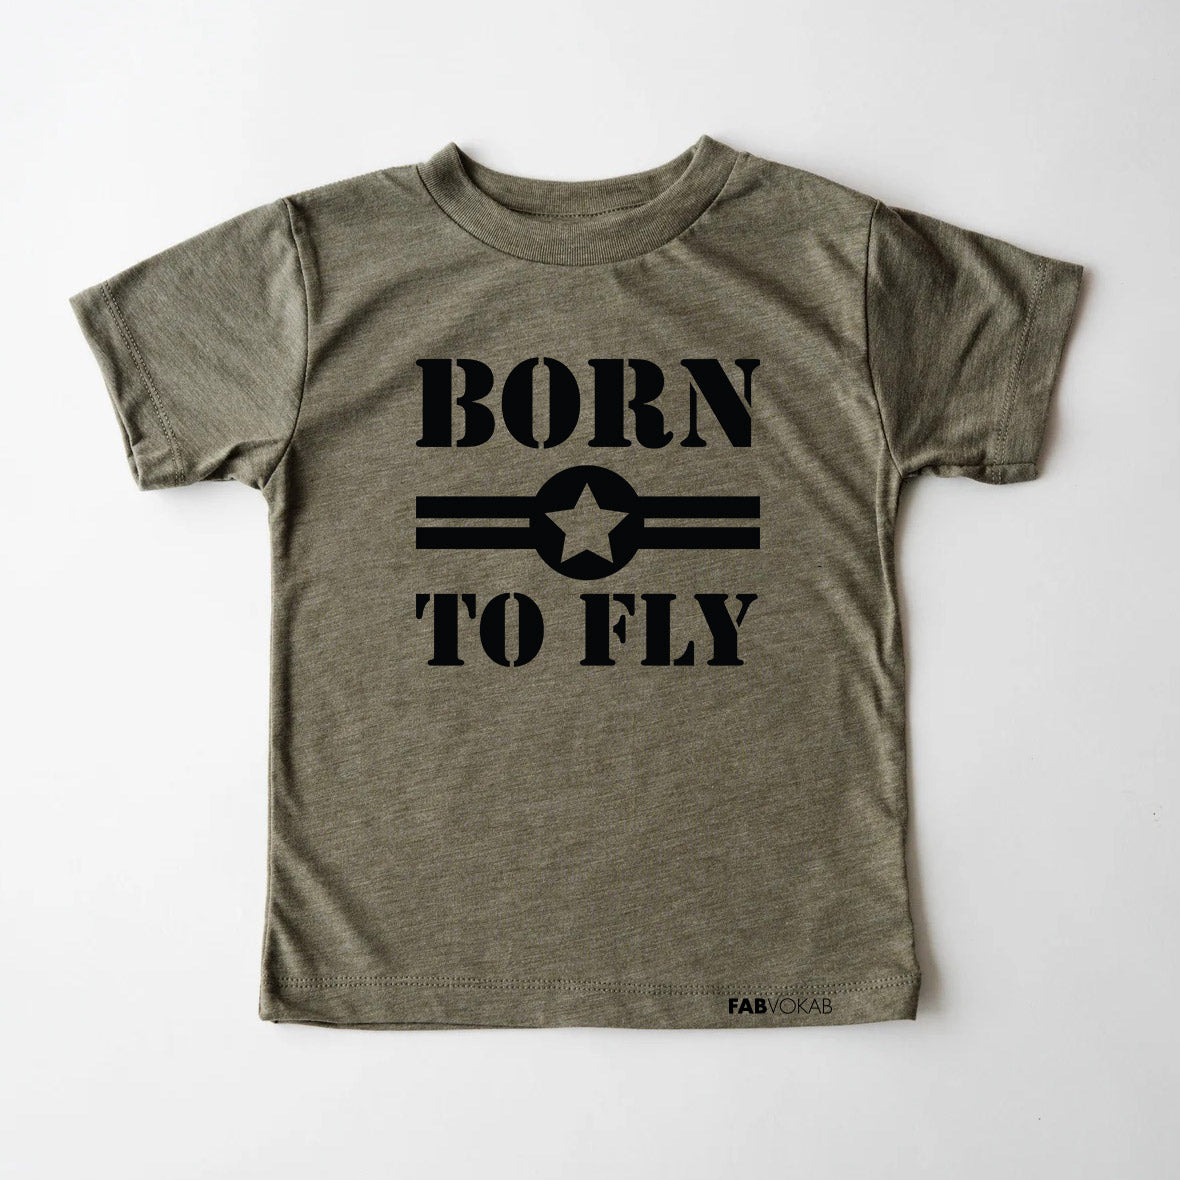 BORN TO FLY Army Green, Olive Triblend Kids Boys Girls Teens Unsex Short Sleeve T-shirt FABVOKAB